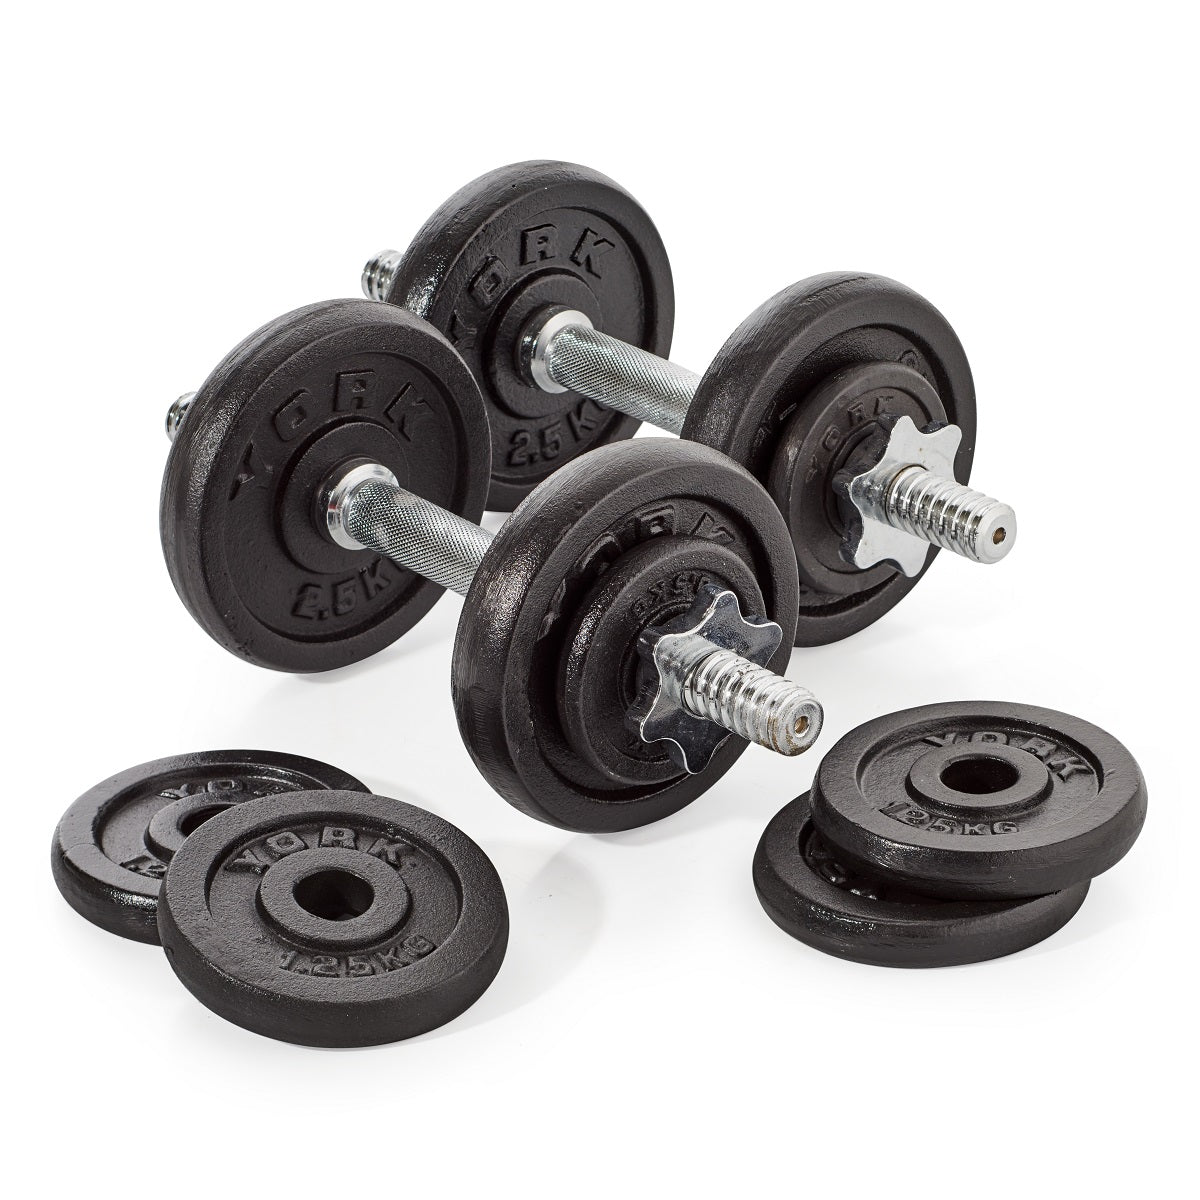 Buy  basics Quality Solid Cast-Iron Construction Fixed Dumbbell,  20-Pound (9.1 KGS) Black Online at Low Prices in India 